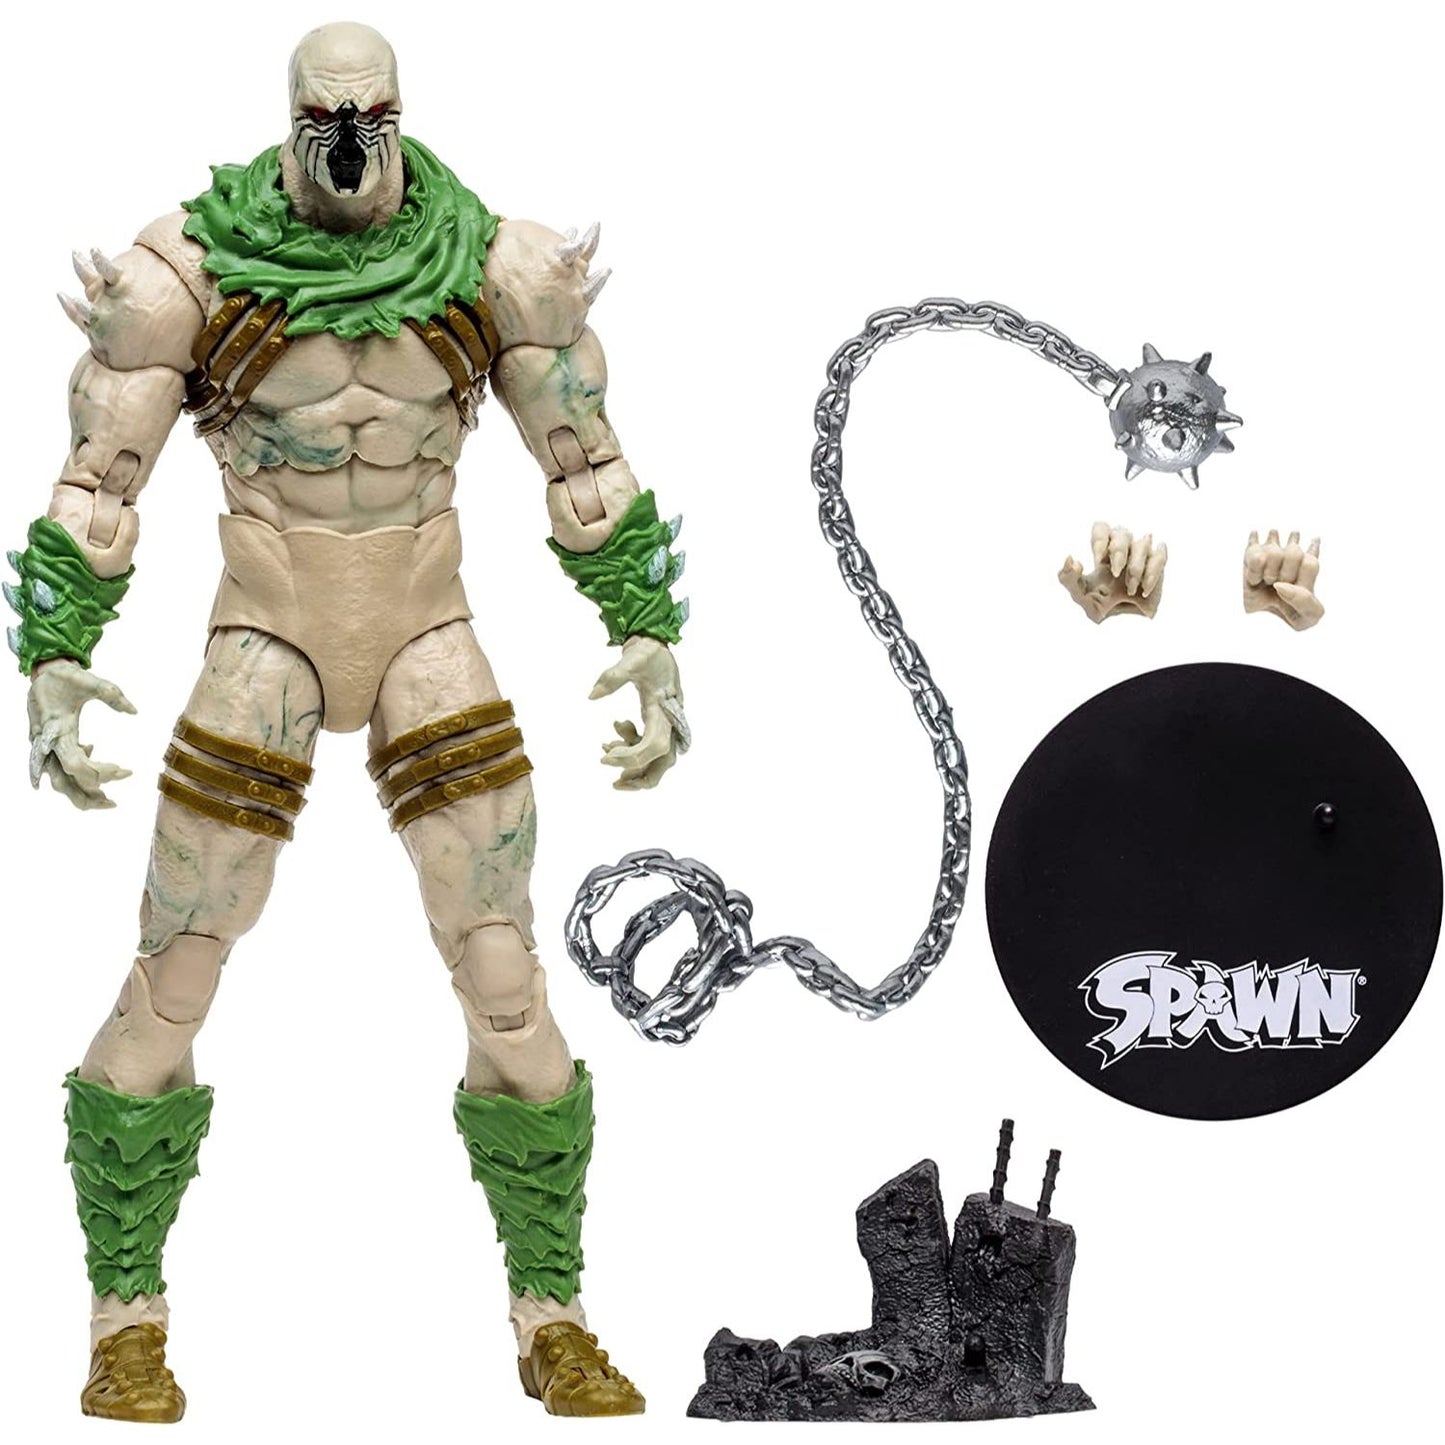 Spawn - King Spider 7-Inch Action Figure Toy